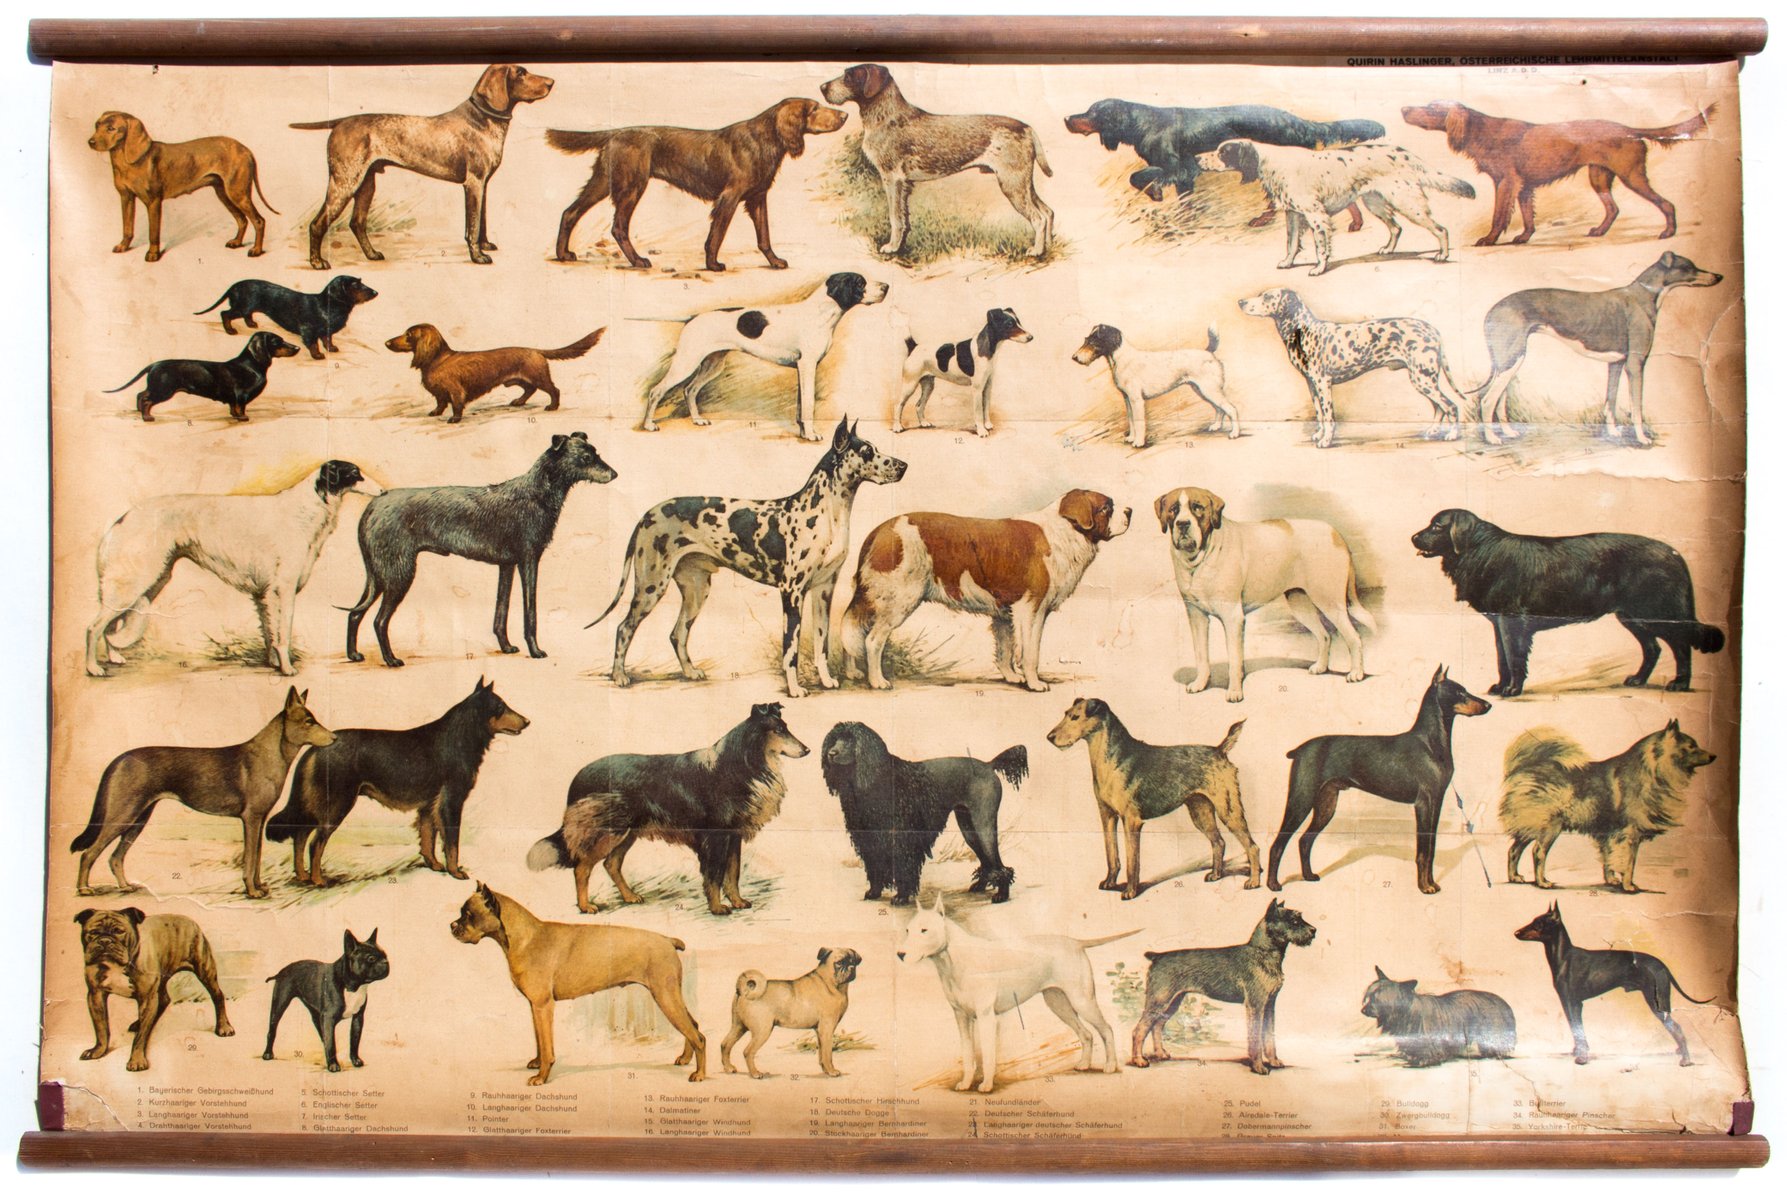 Wall Chart of Dog Breeds, 1952 for sale at Pamono